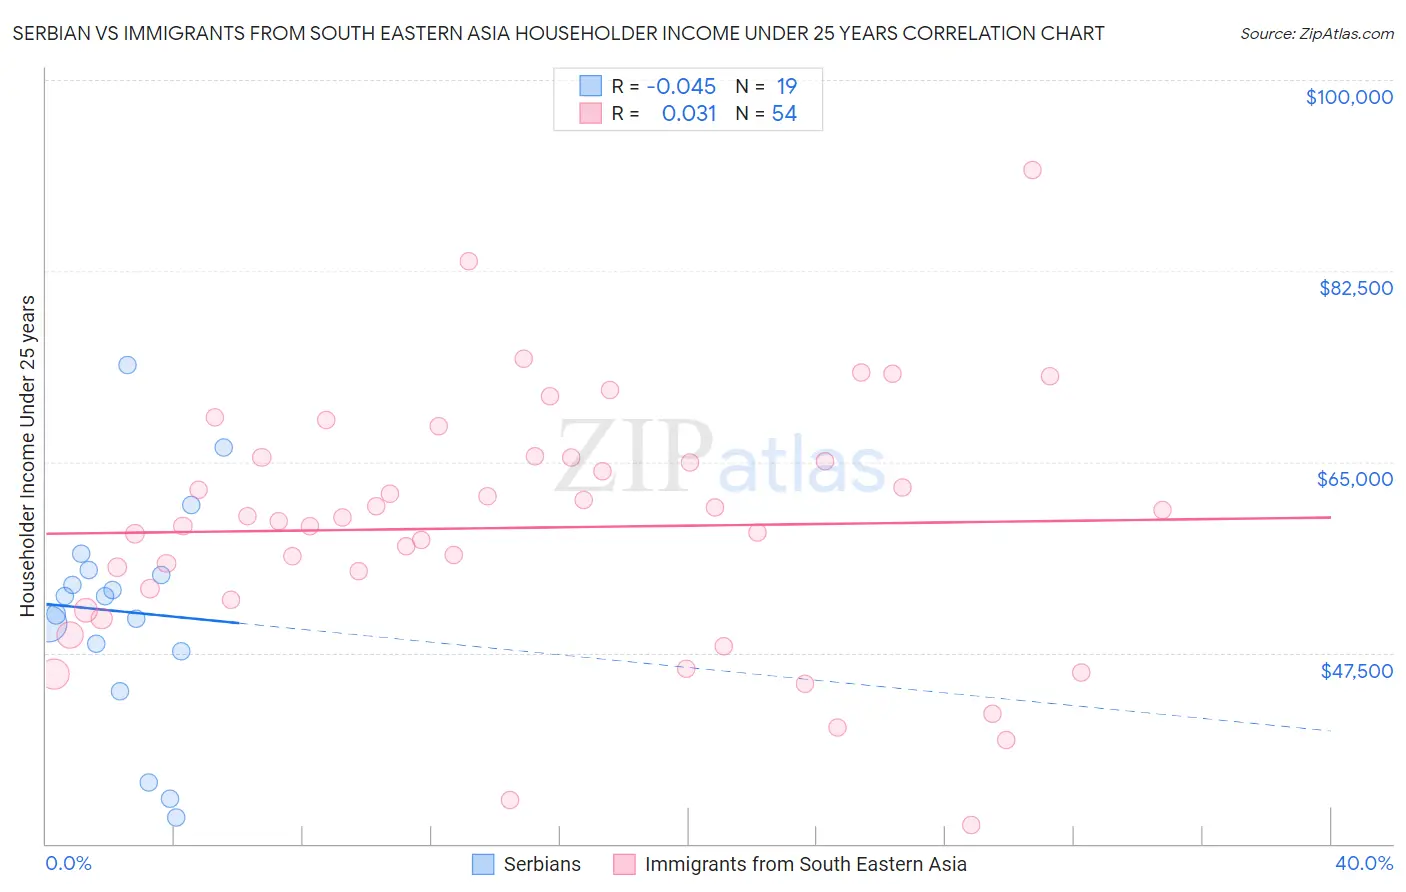 Serbian vs Immigrants from South Eastern Asia Householder Income Under 25 years